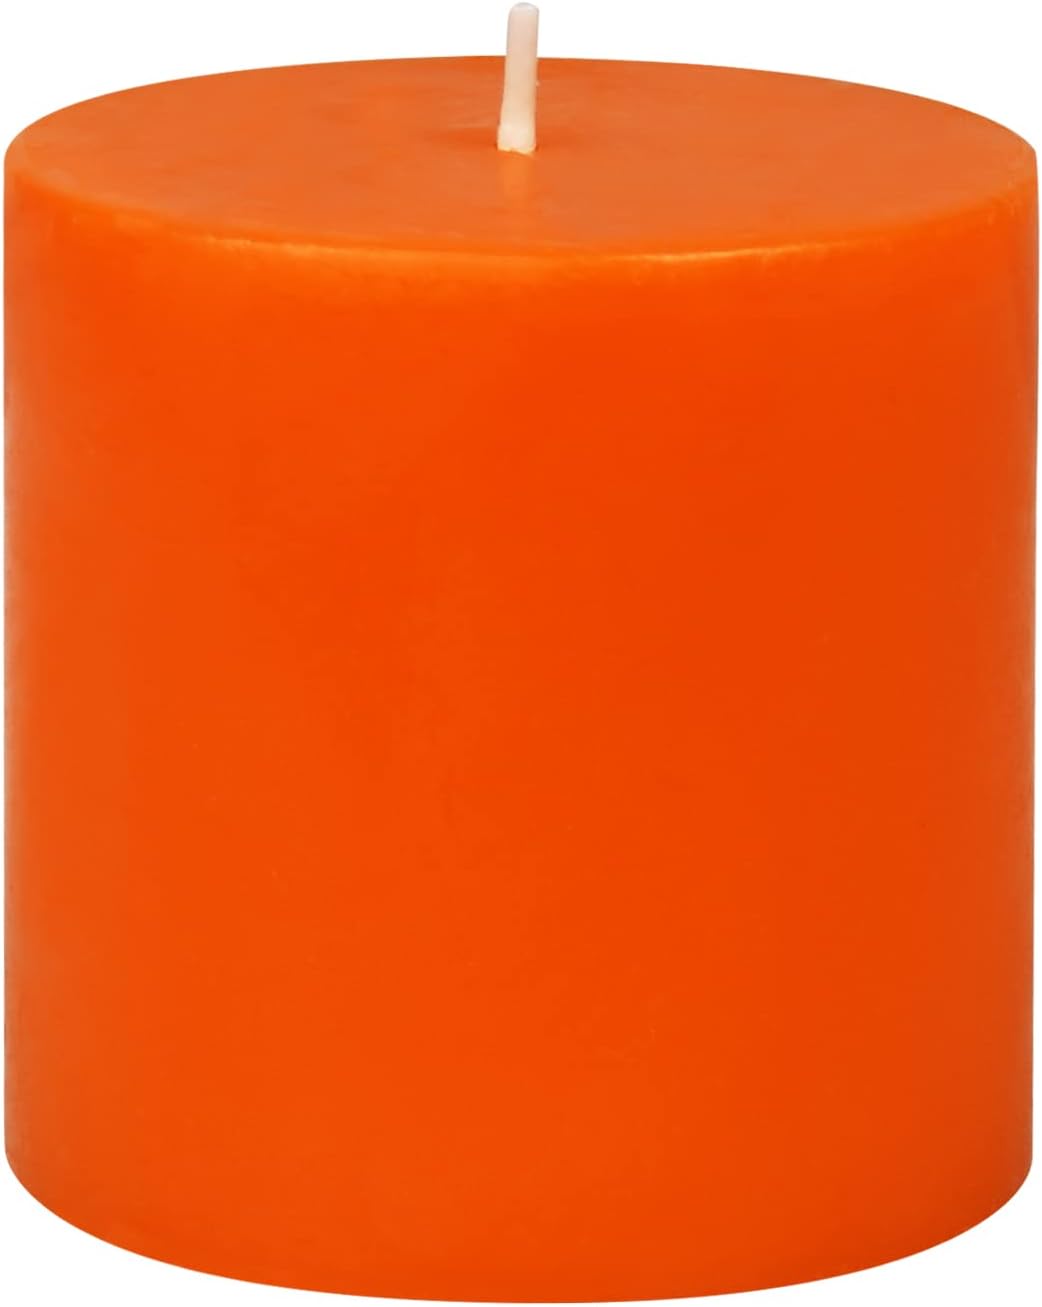 I needed an orange candle to complete a Halloween vignette. The color and size were perfect!